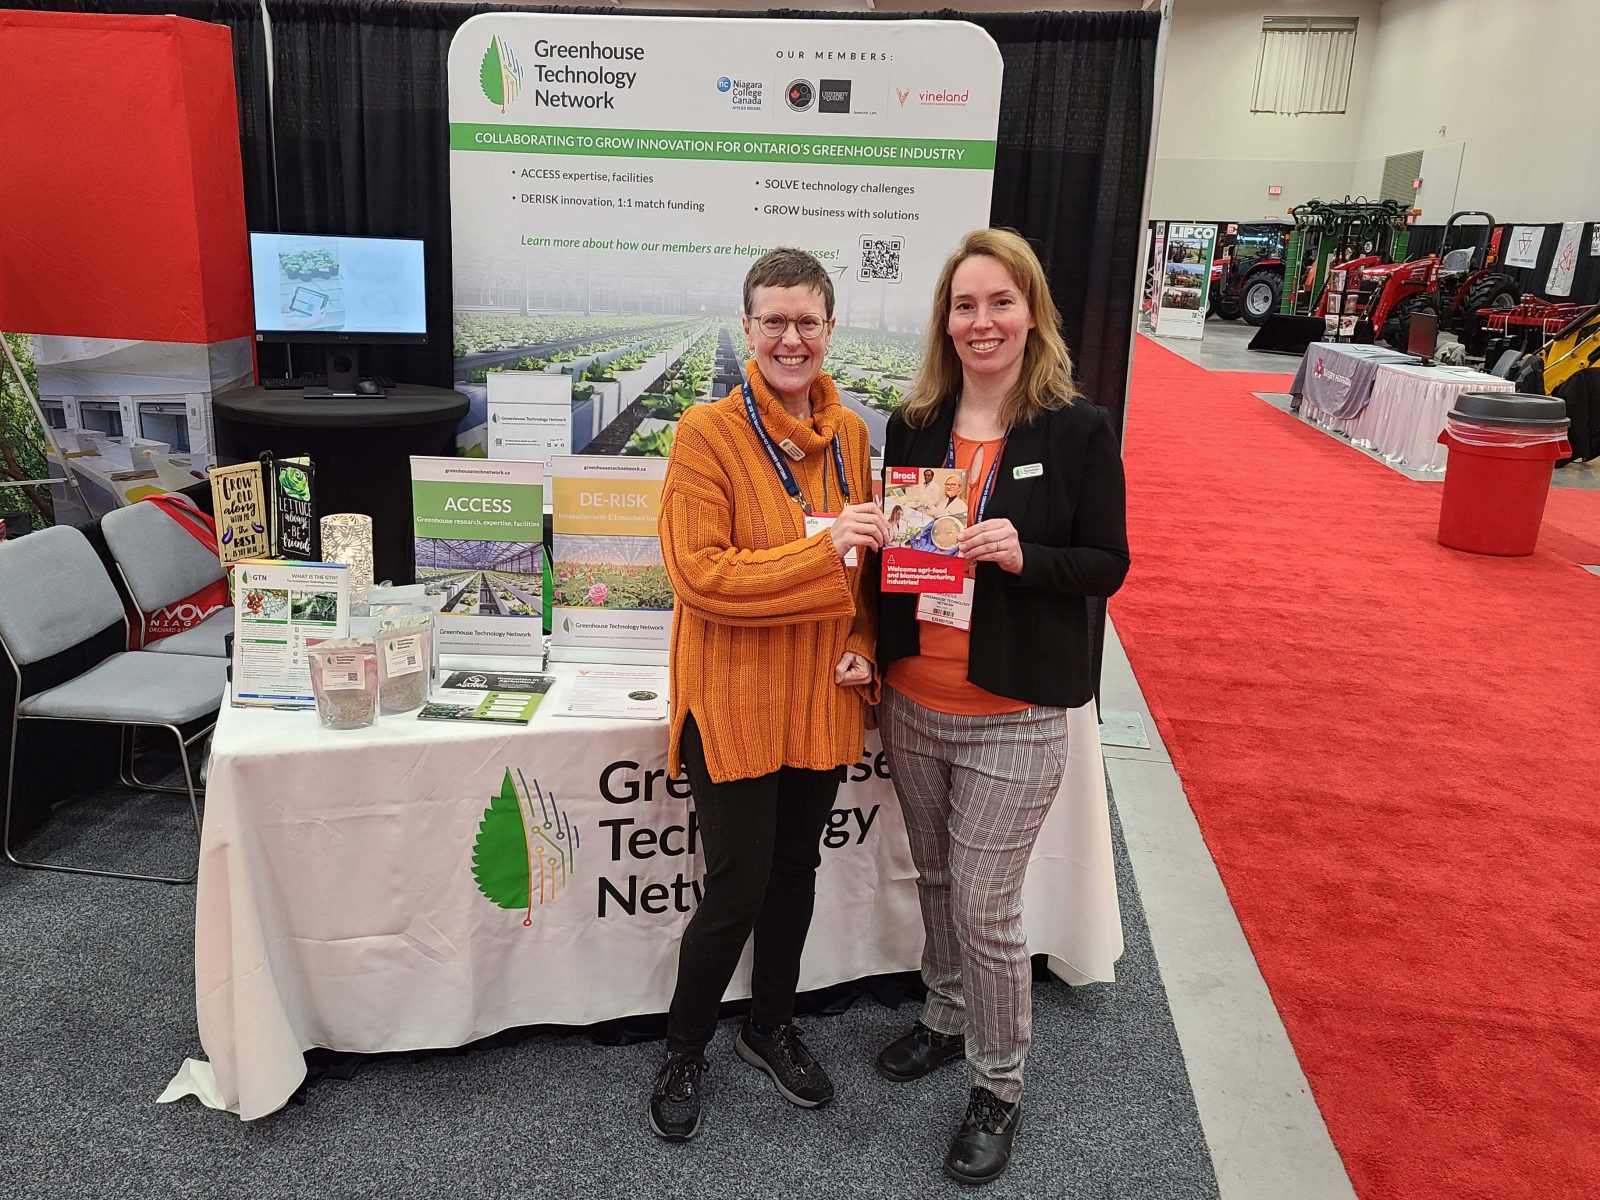 Two women stand in front of a conference display holding a brochure with a red carpet next to them and farming equipment in the background.